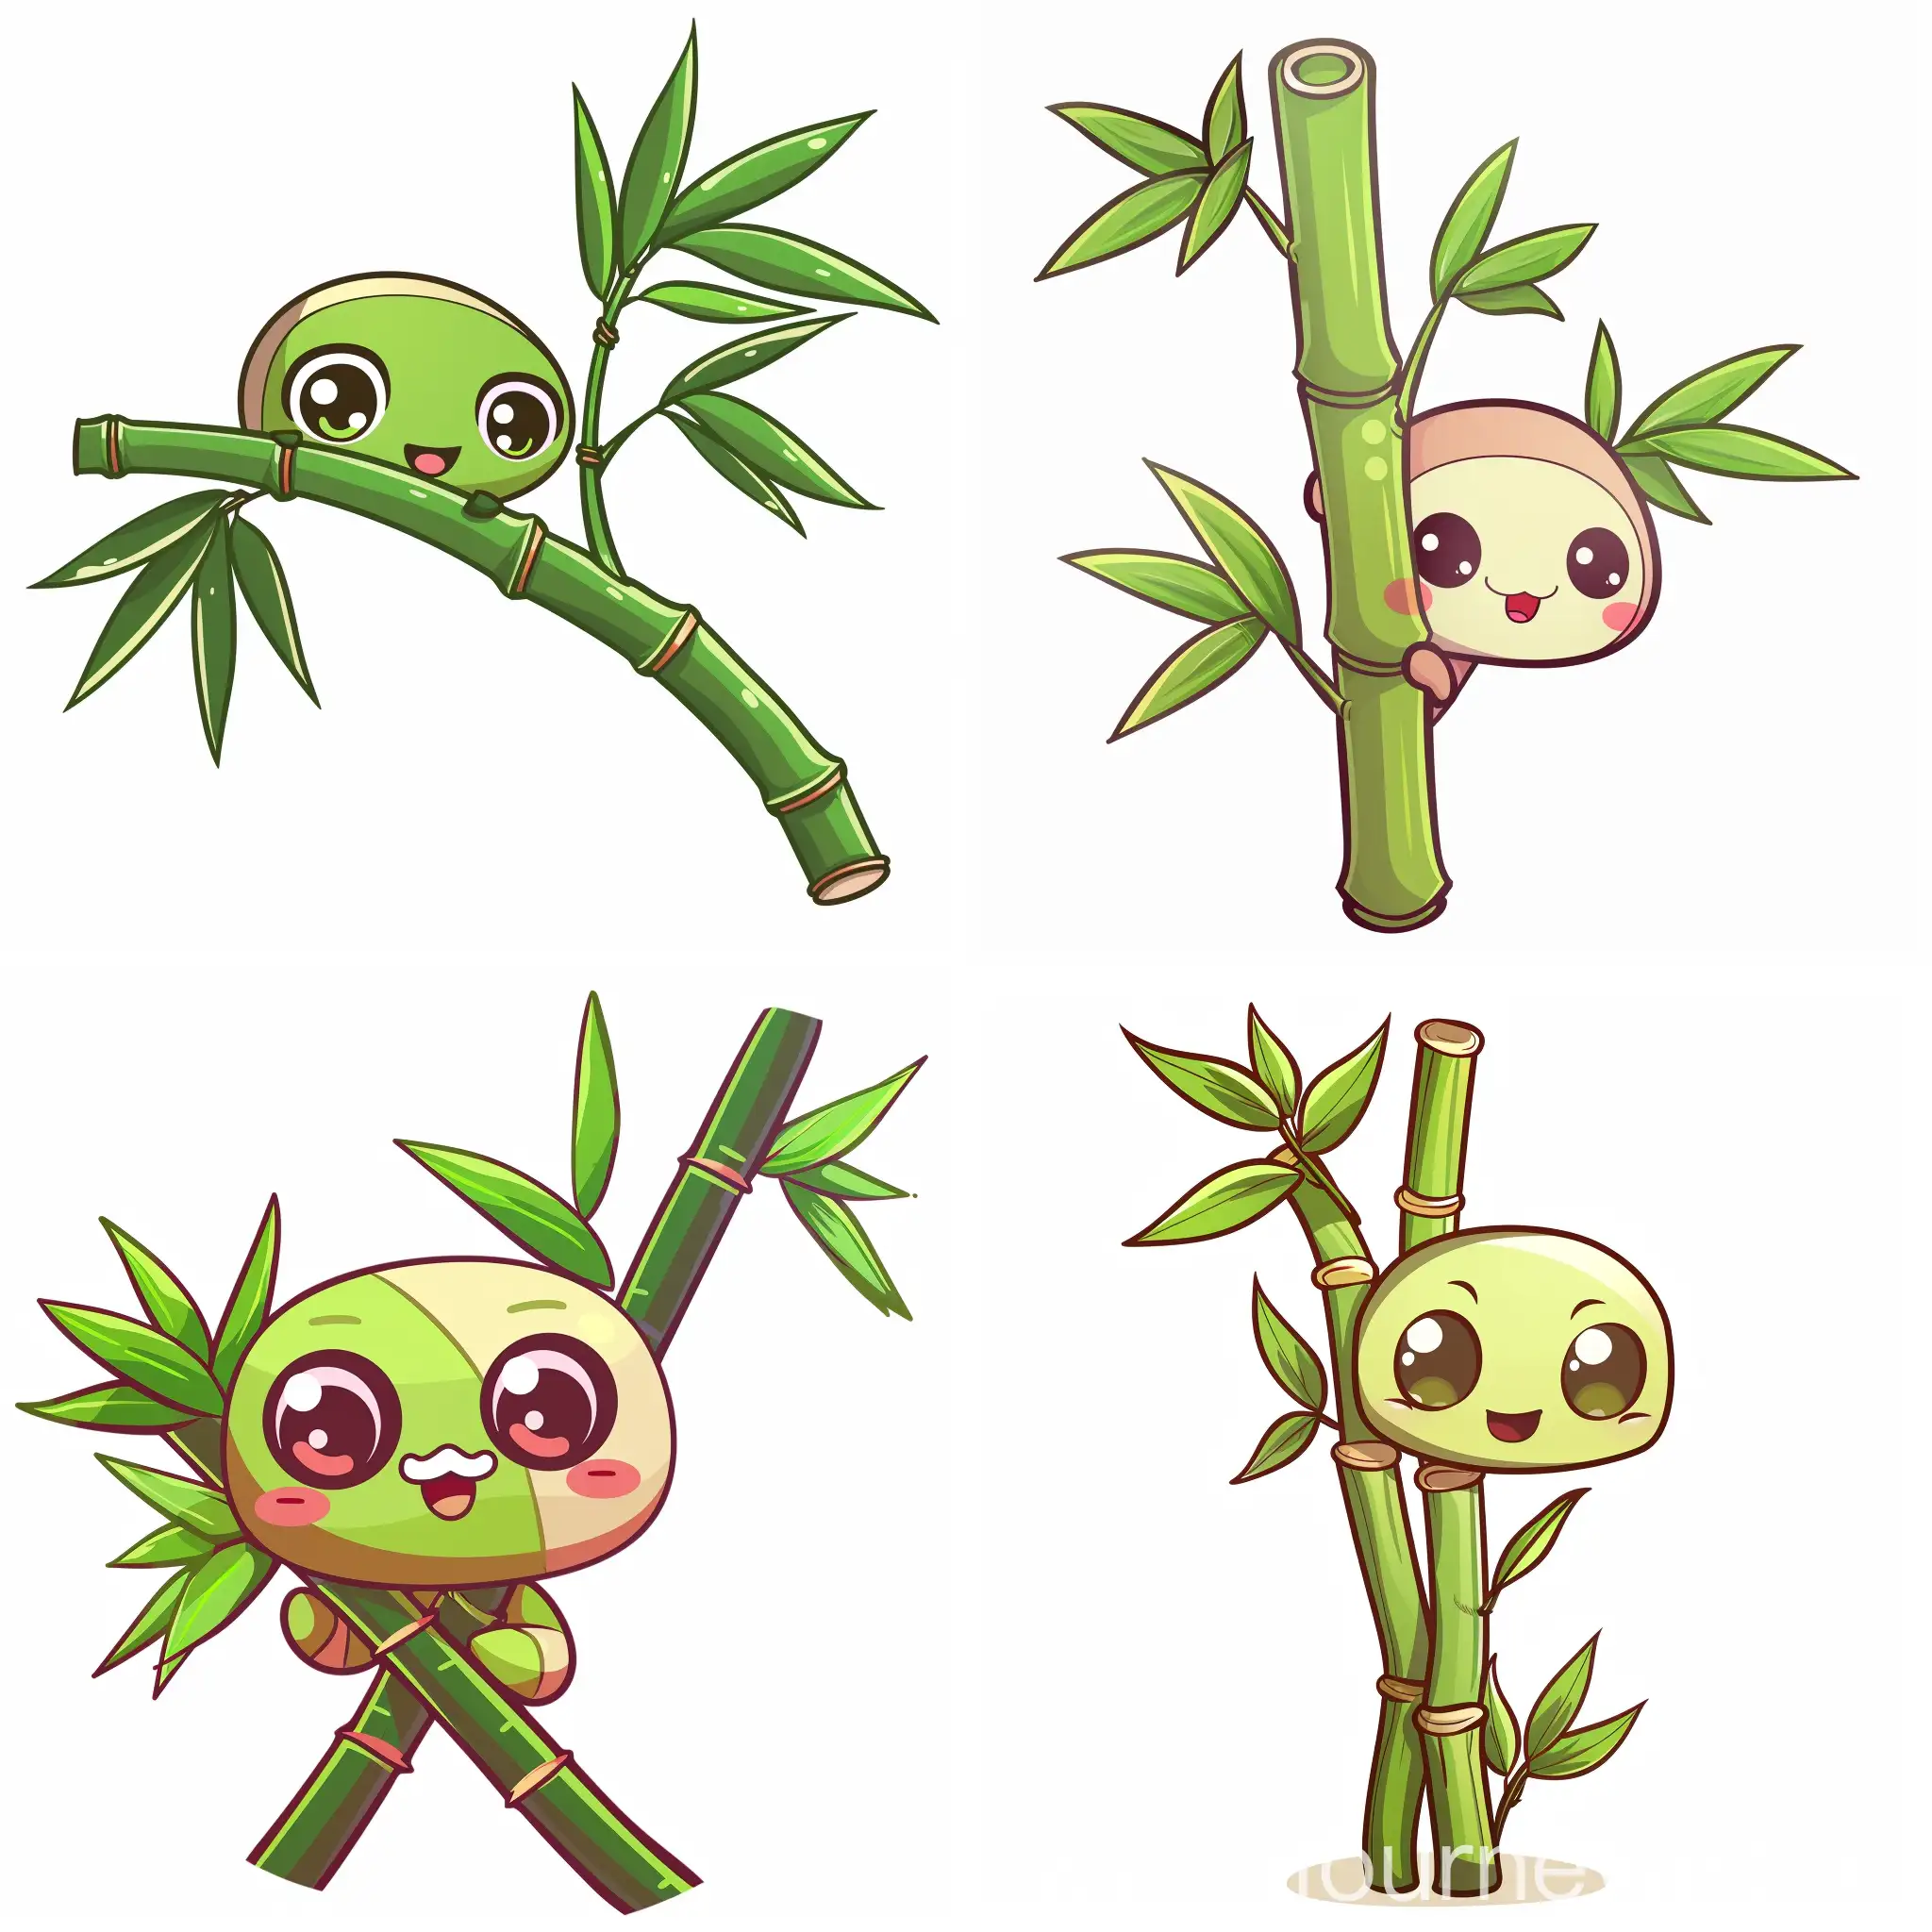 image of a bamboo tree branch cartoon character chibi style